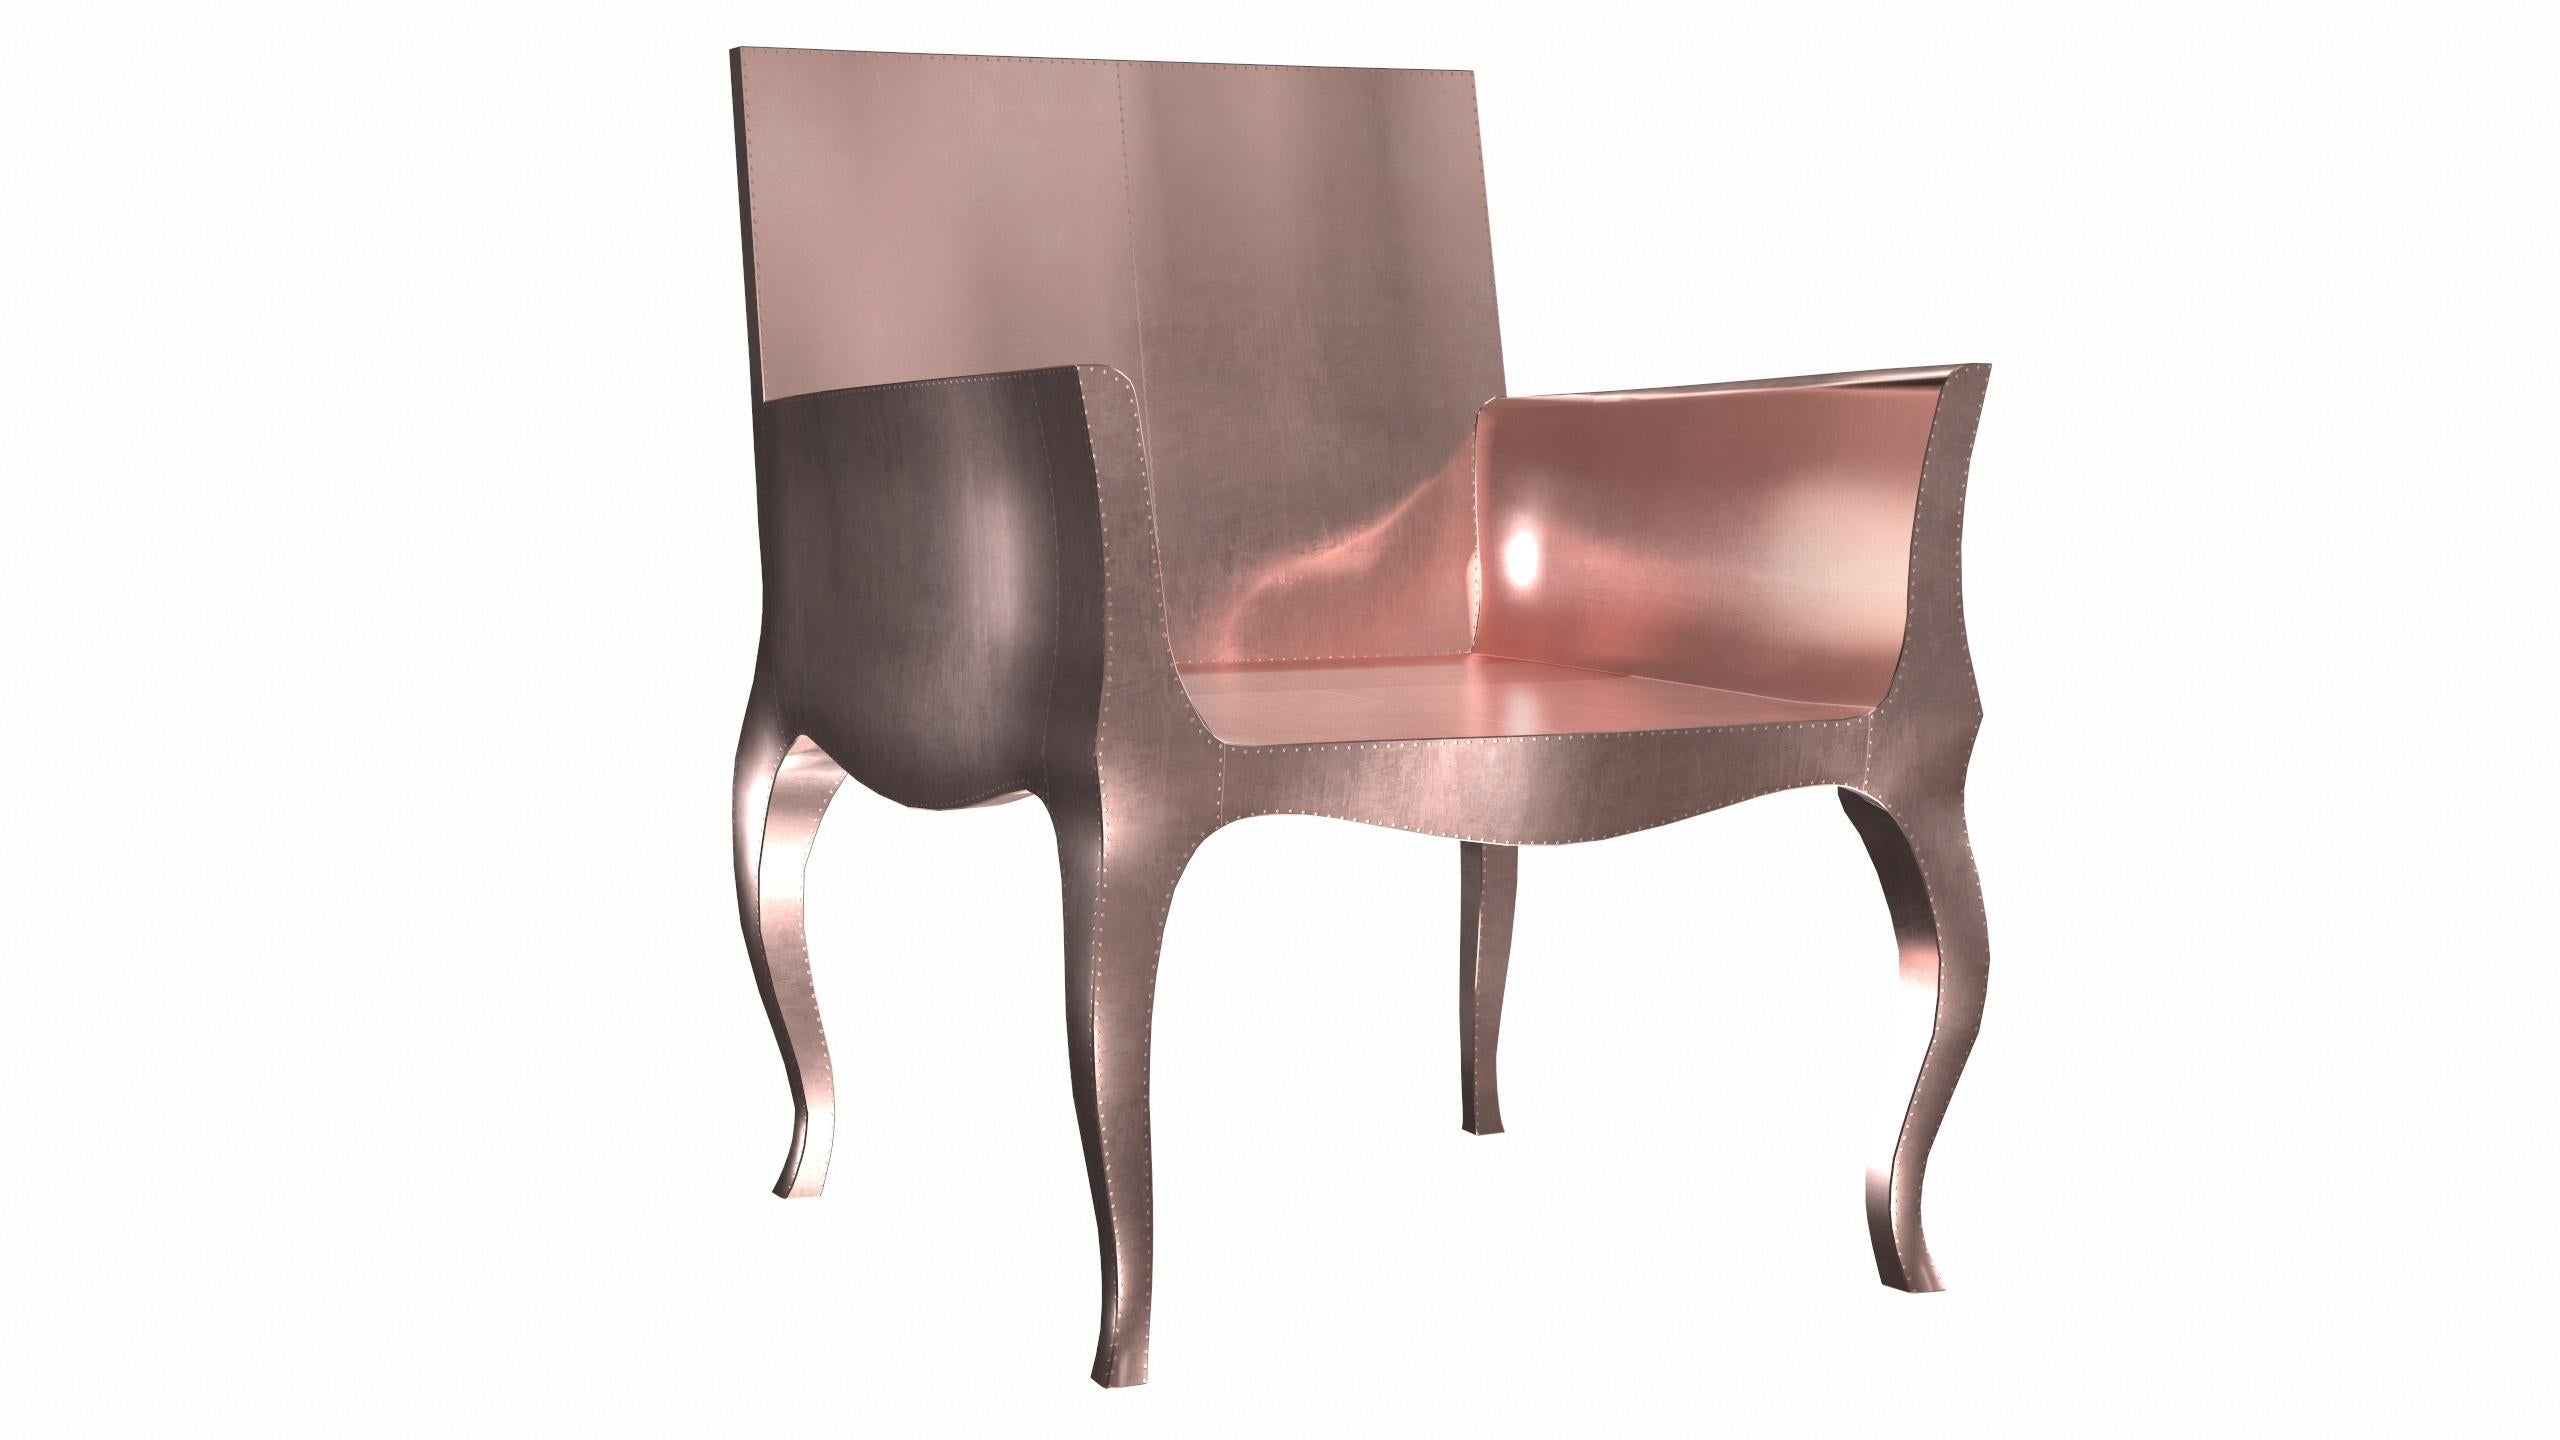 Hand-Carved Art Deco Office Chair in Smooth Copper by Paul Mathieu for S. Odegard For Sale